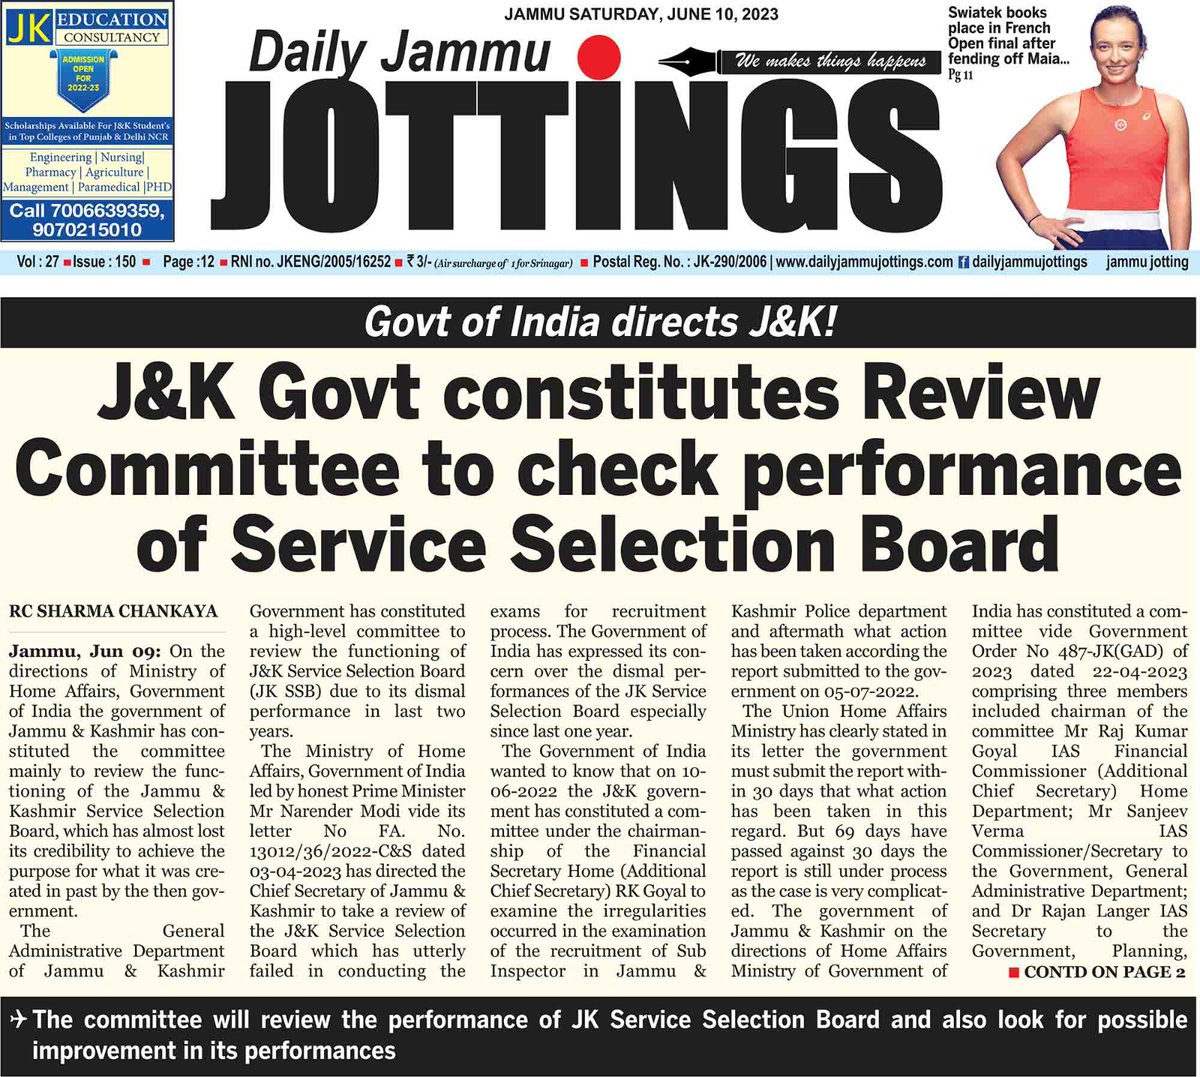 Another 3 members committee once Again R.K Goyal and once again for JKSSB

#removeaptech
#judicialinquiry
#kvspaperleaked
#youthagainstcorruption 
@DrGauravGarg4 @enticeful_ @narendramodi @AmitShah @dwivedimk_ias @jkssbofficial @OfficeOfLGJandK @JammuJottings01